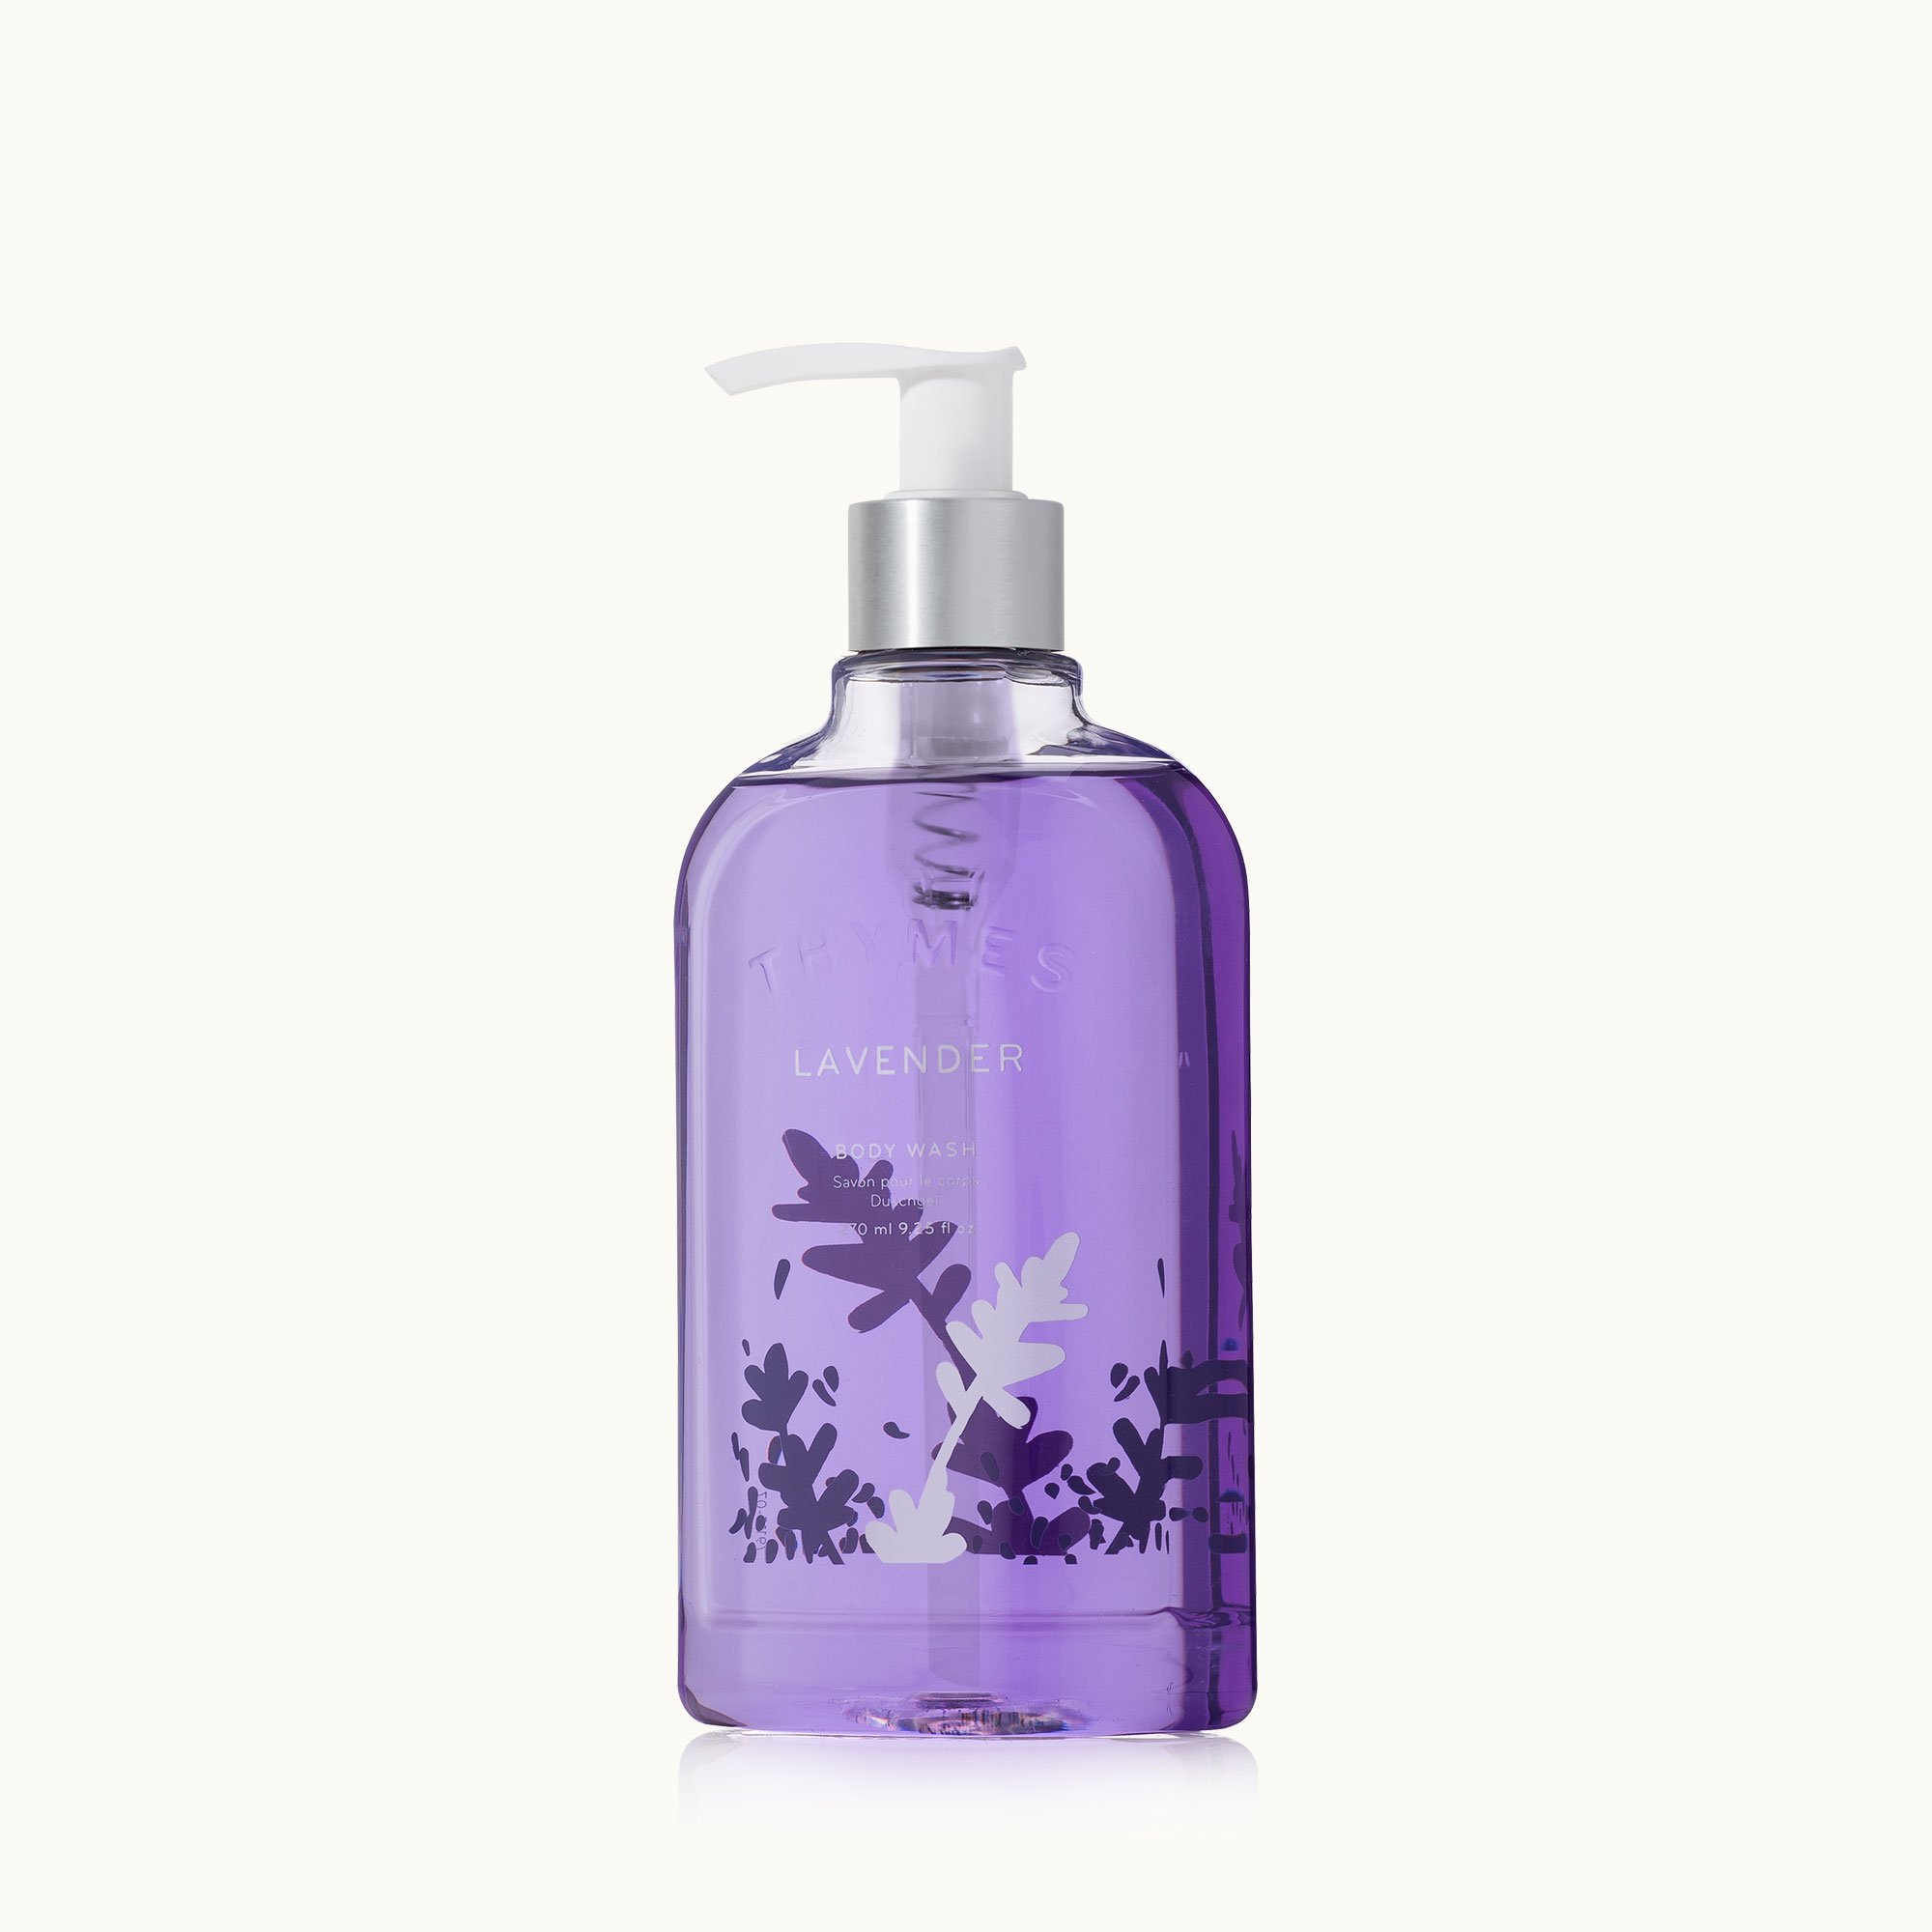  Thymes Body Lotion - 9.25 Fl Oz - Lavender : Beauty & Personal  Care